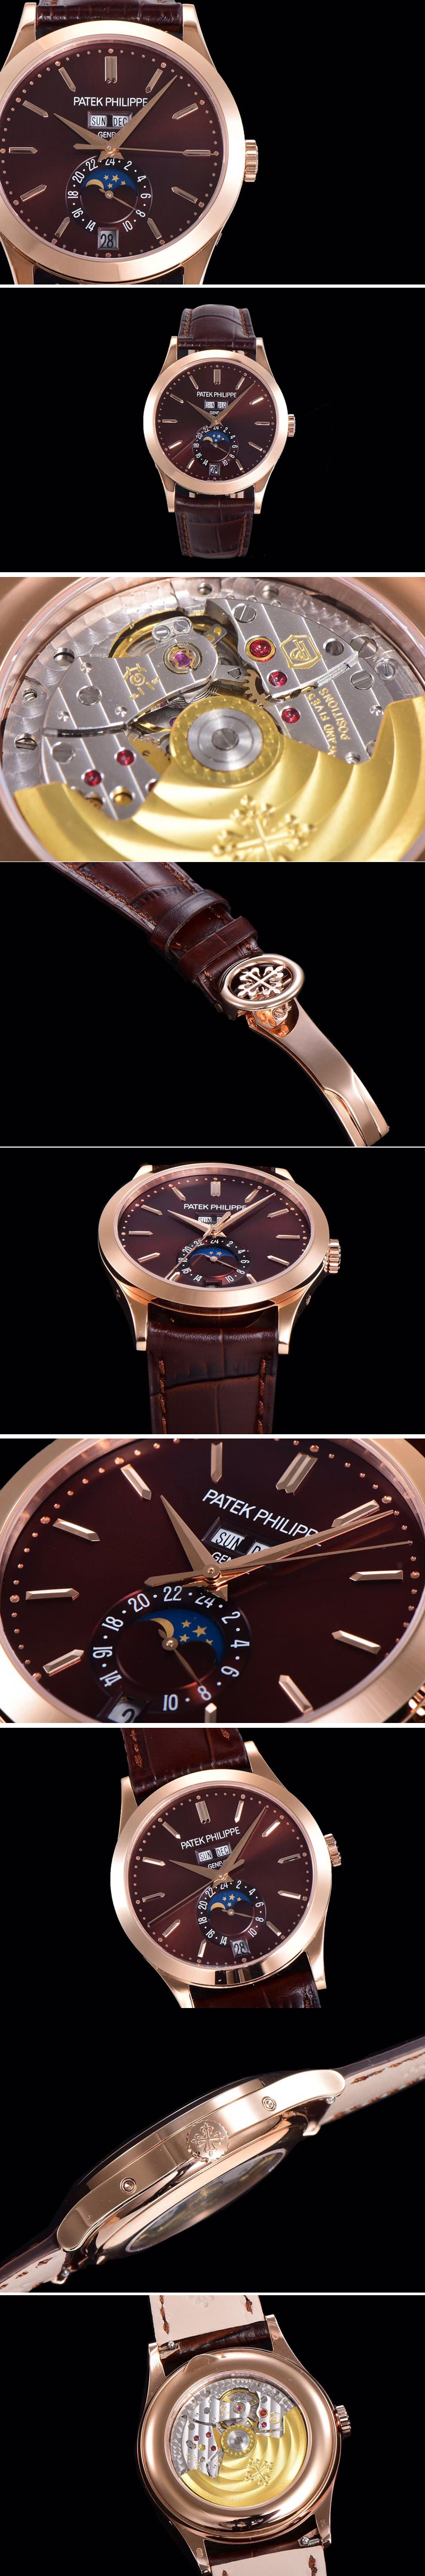 Replica Patek Philippe Annual Calendar Complications 5396 RG GRF Best Edition Black dial on Brown leather strap A324